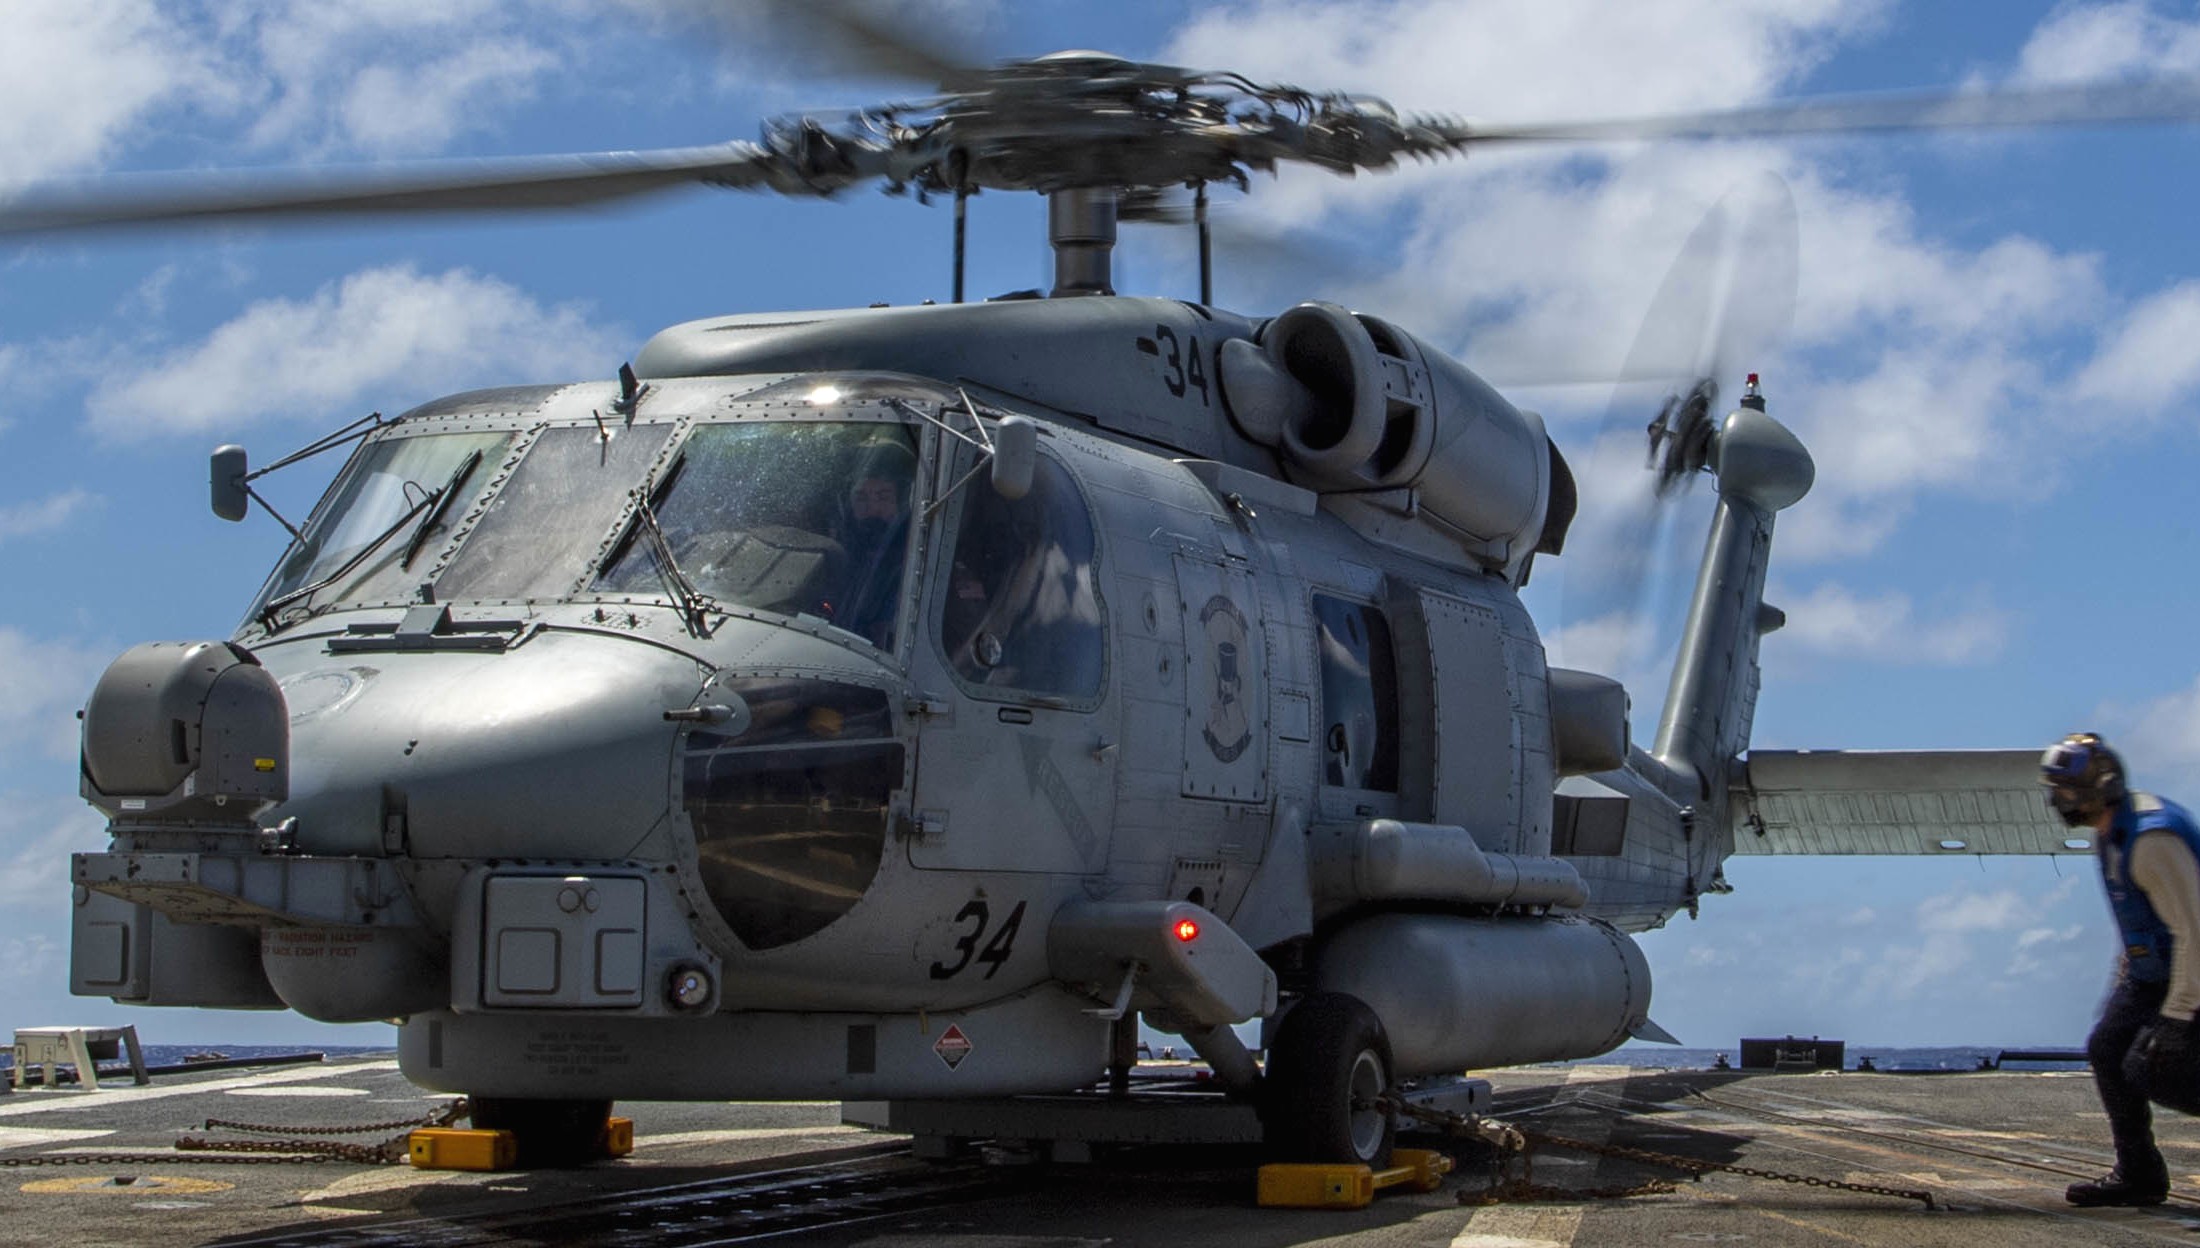 hsm-35 magicians helicopter maritime strike squadron us navy mh-60r seahawk 62